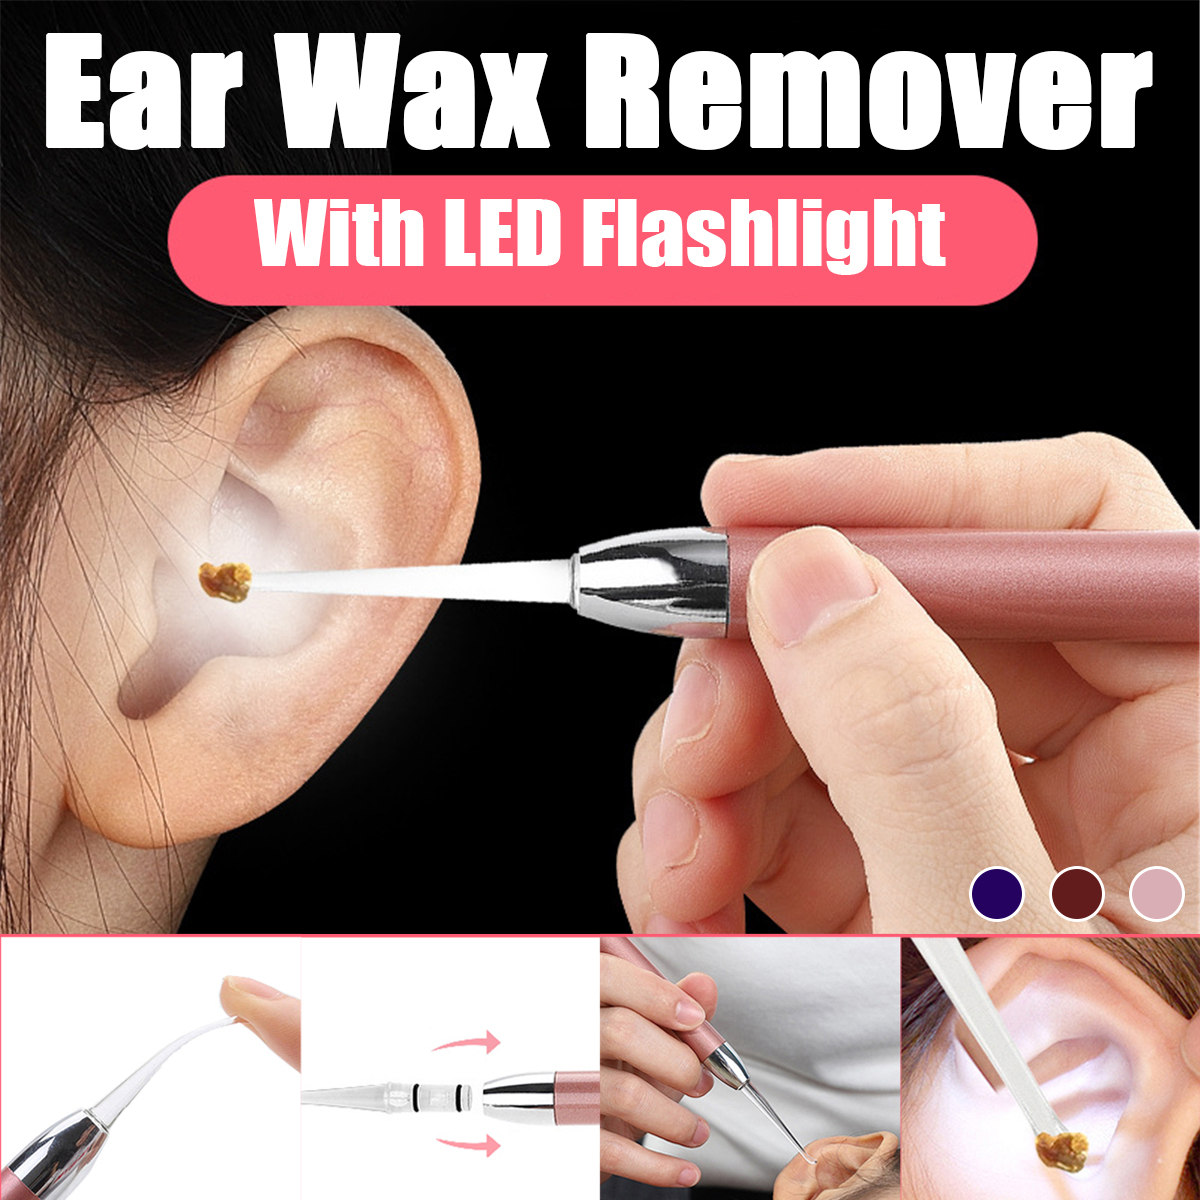 LED-Flashlight-Earpick-Ear-Wax-Remover-Ear-Cleaning-Tool-for-Children-and-Adult-Ear-Care-Set-1782776-1